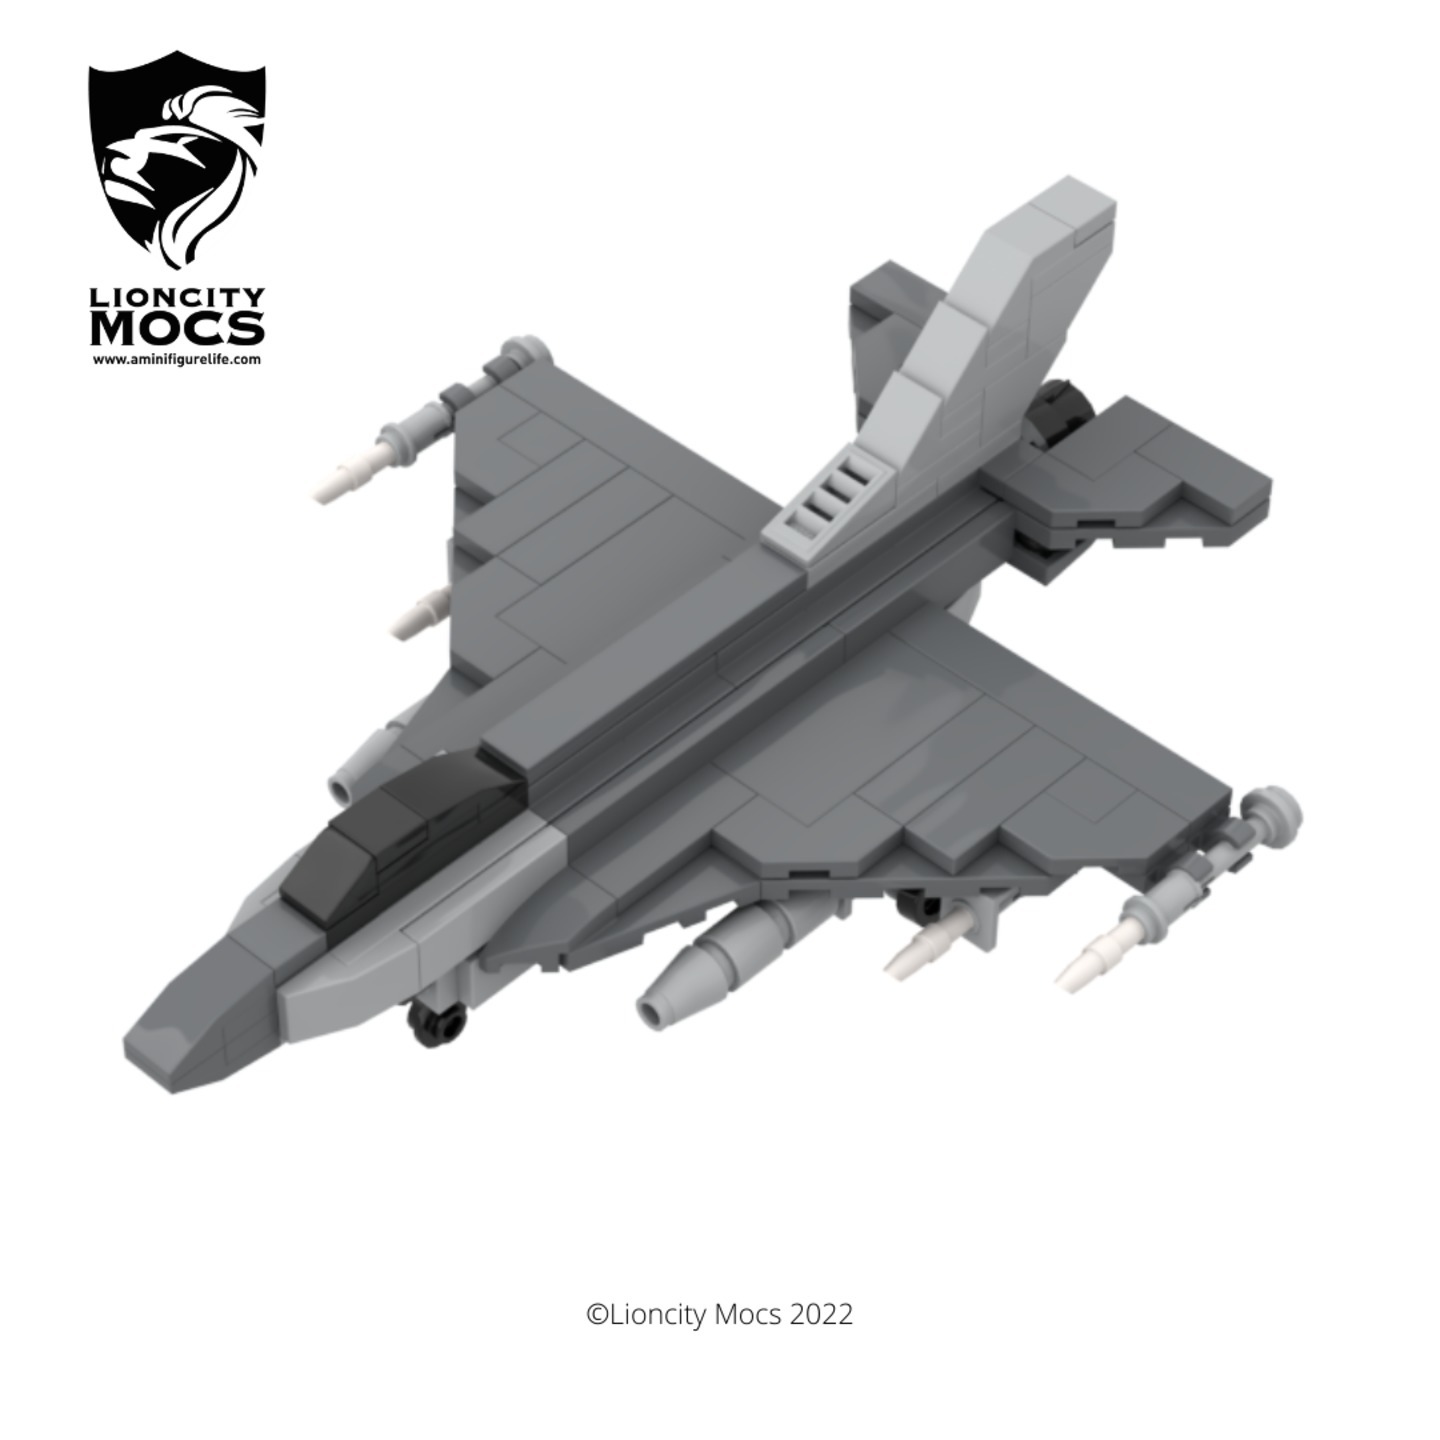 [PDF Instructions Only] F-16 Fighting Falcon Mini